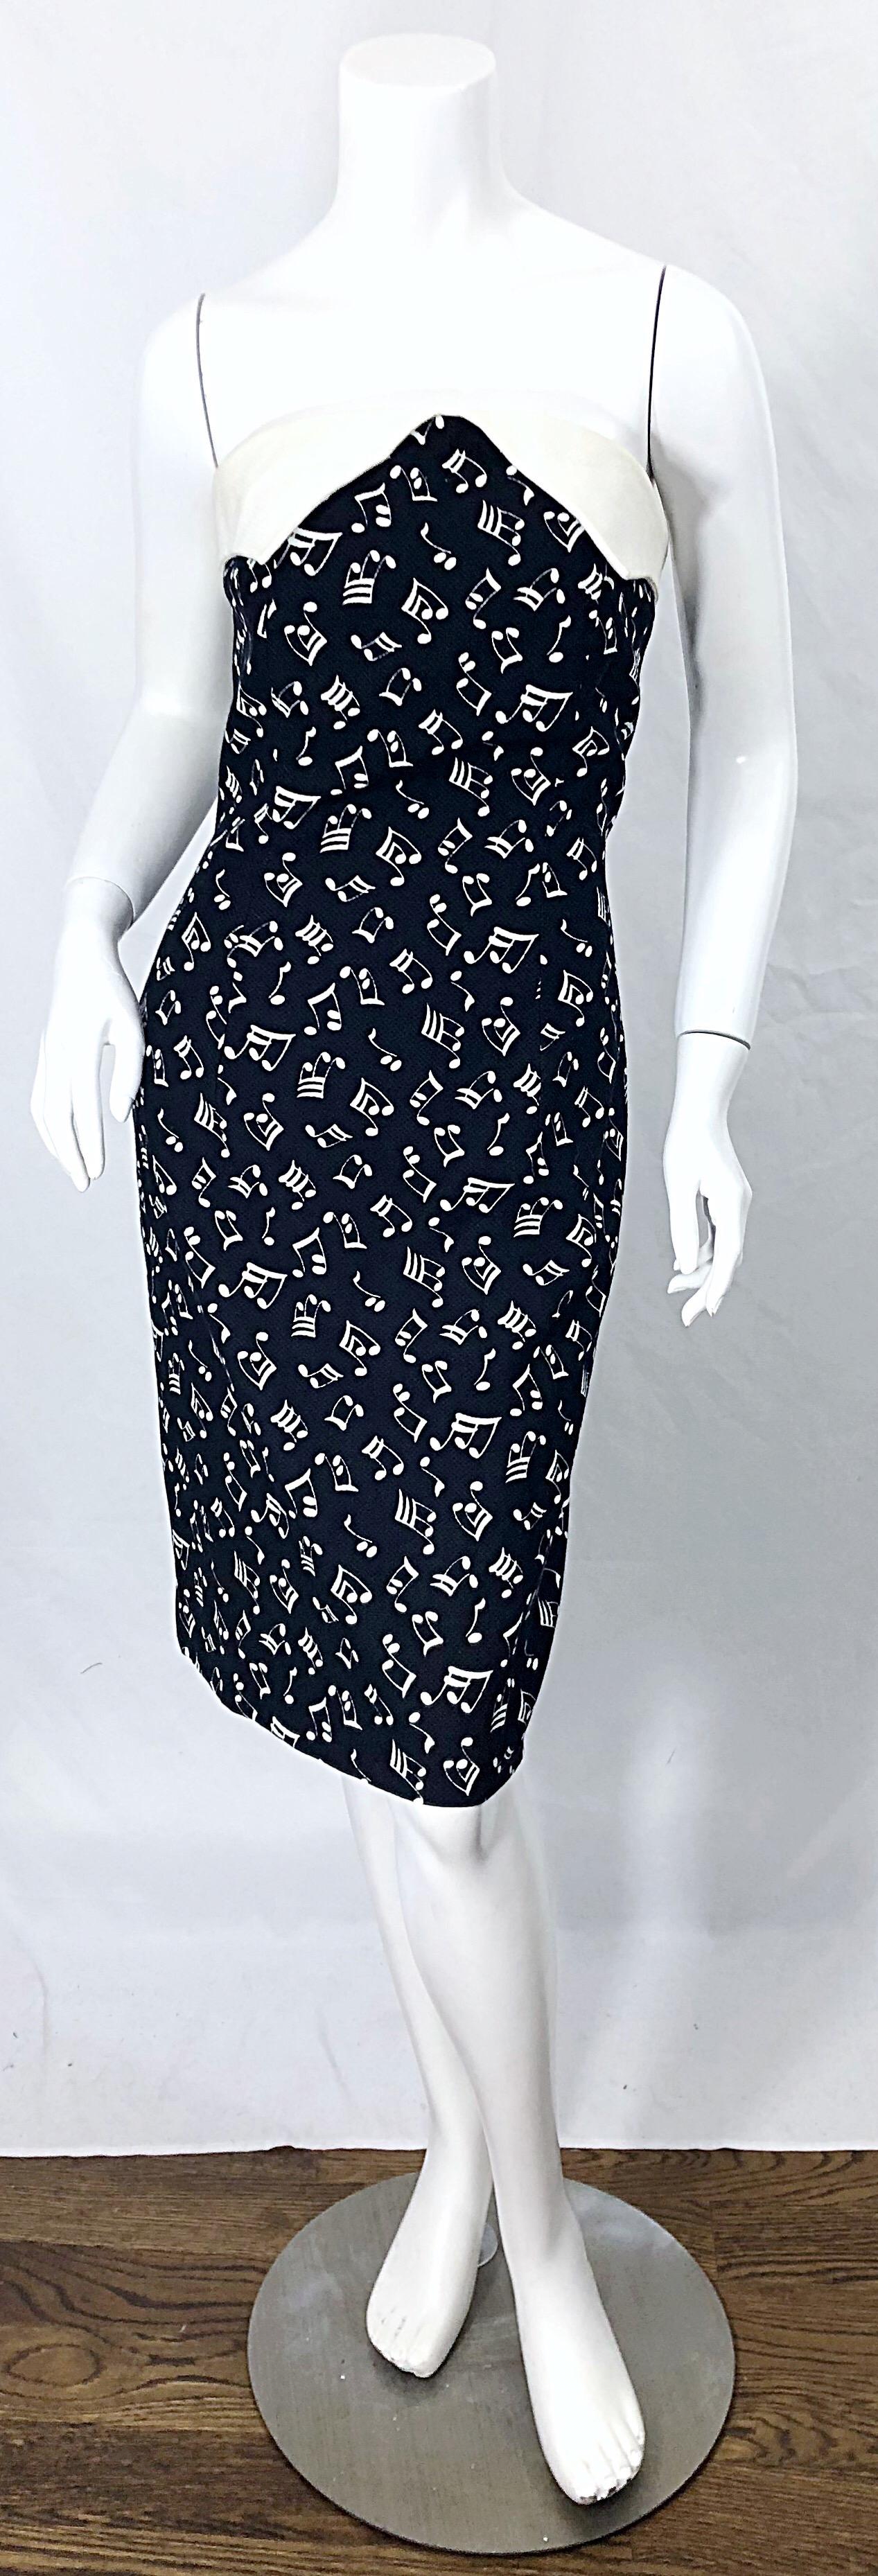 Rare vintage 80s PATRICK KELLY novelty music print black and white strapless dress ! Features a black cotton fabric with printed white music notes throughout. White poplin cotton trim around the bodice. Hidden zipper up the back with hook-and-eye